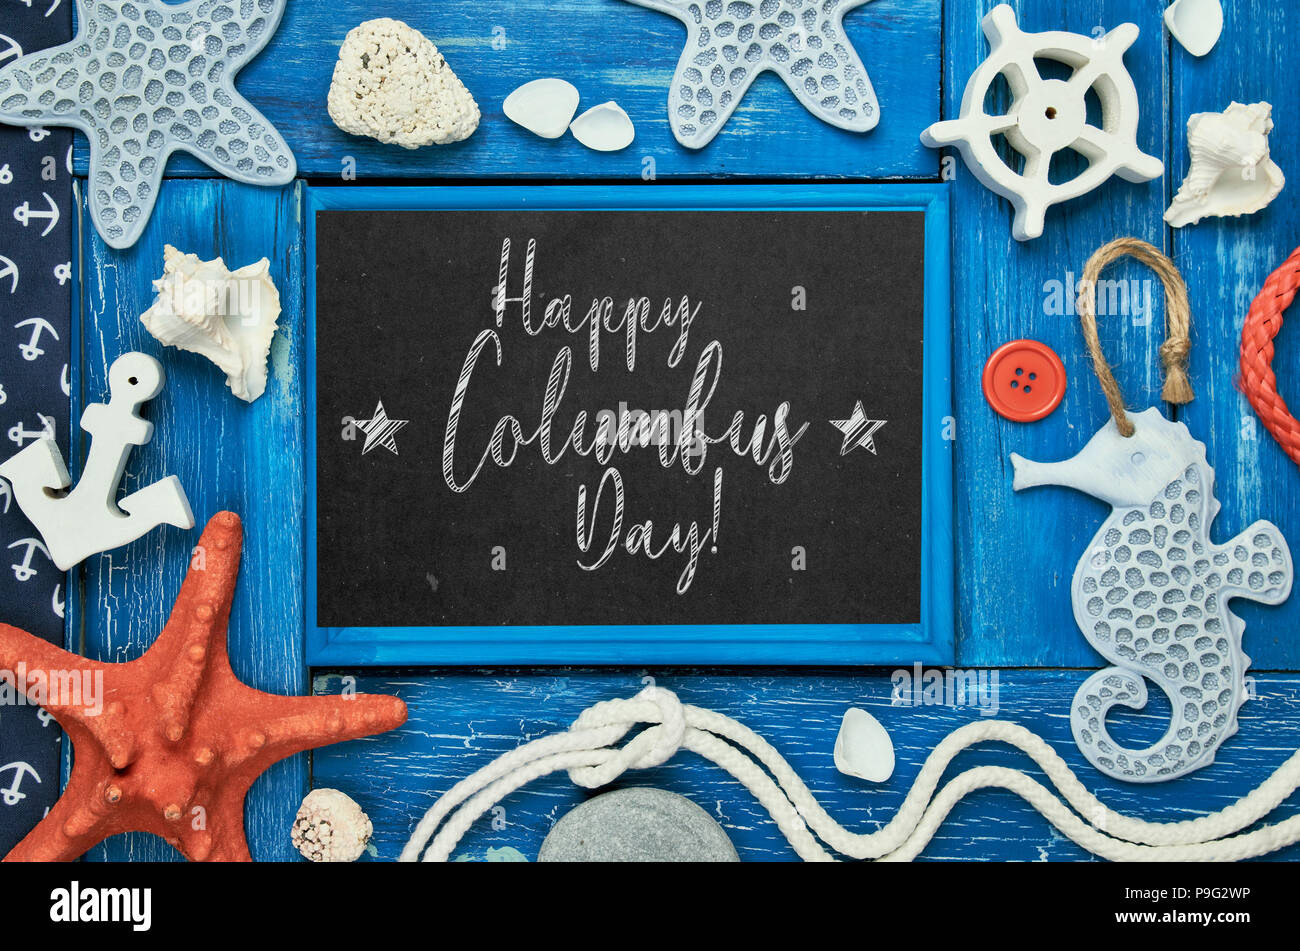 Blank blackboard with sea shells, stones, rope and star fish on blue wooden background, text 'Happy Columbus day' Stock Photo